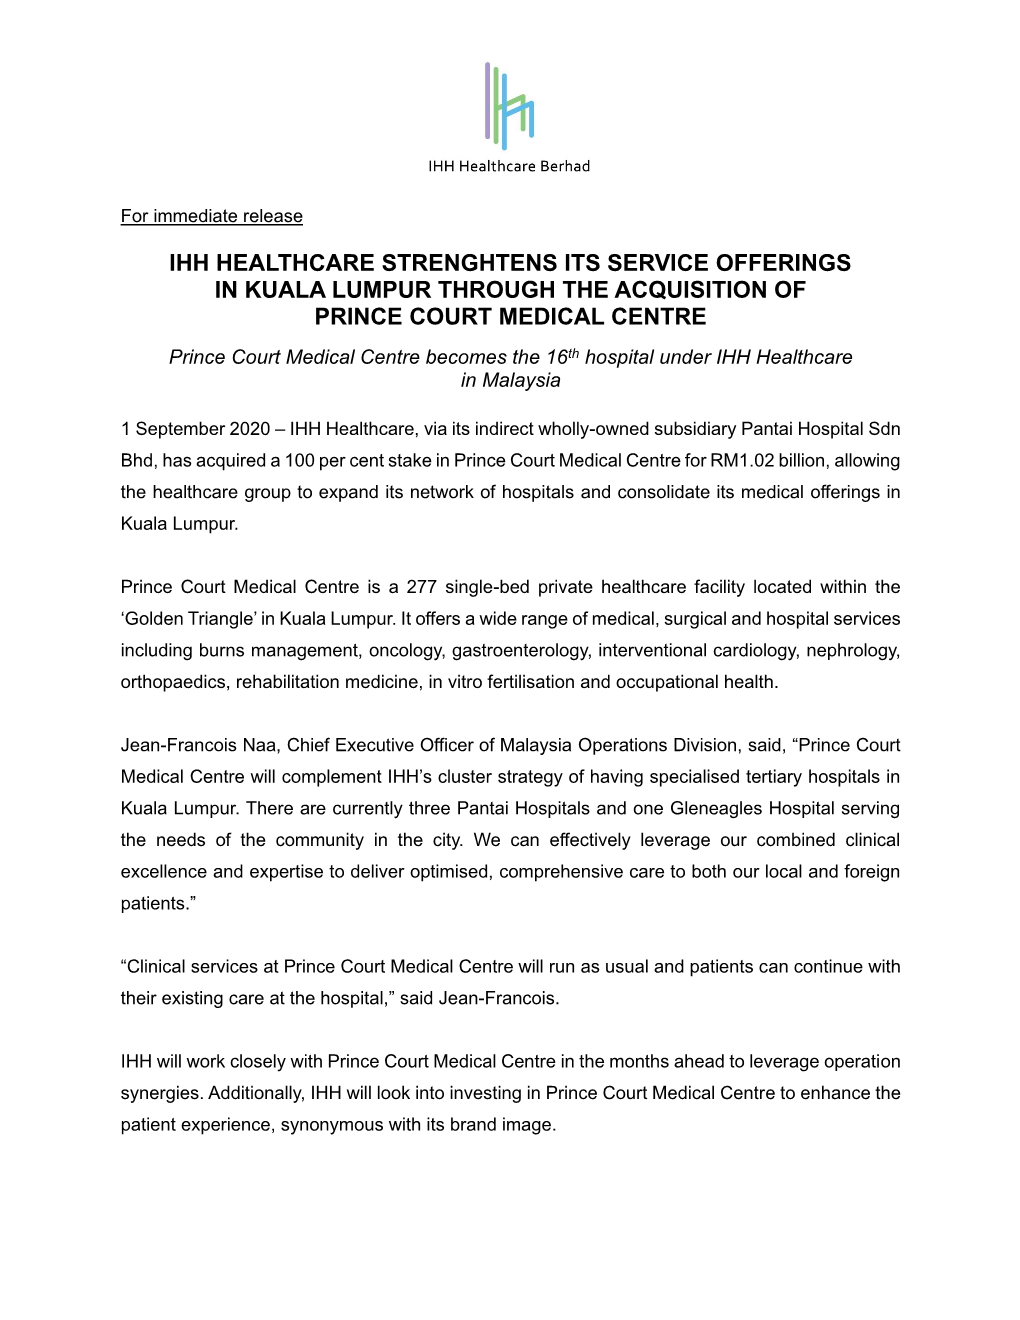 Ihh Healthcare Strenghtens Its Service Offerings in Kuala Lumpur Through the Acquisition of Prince Court Medical Centre